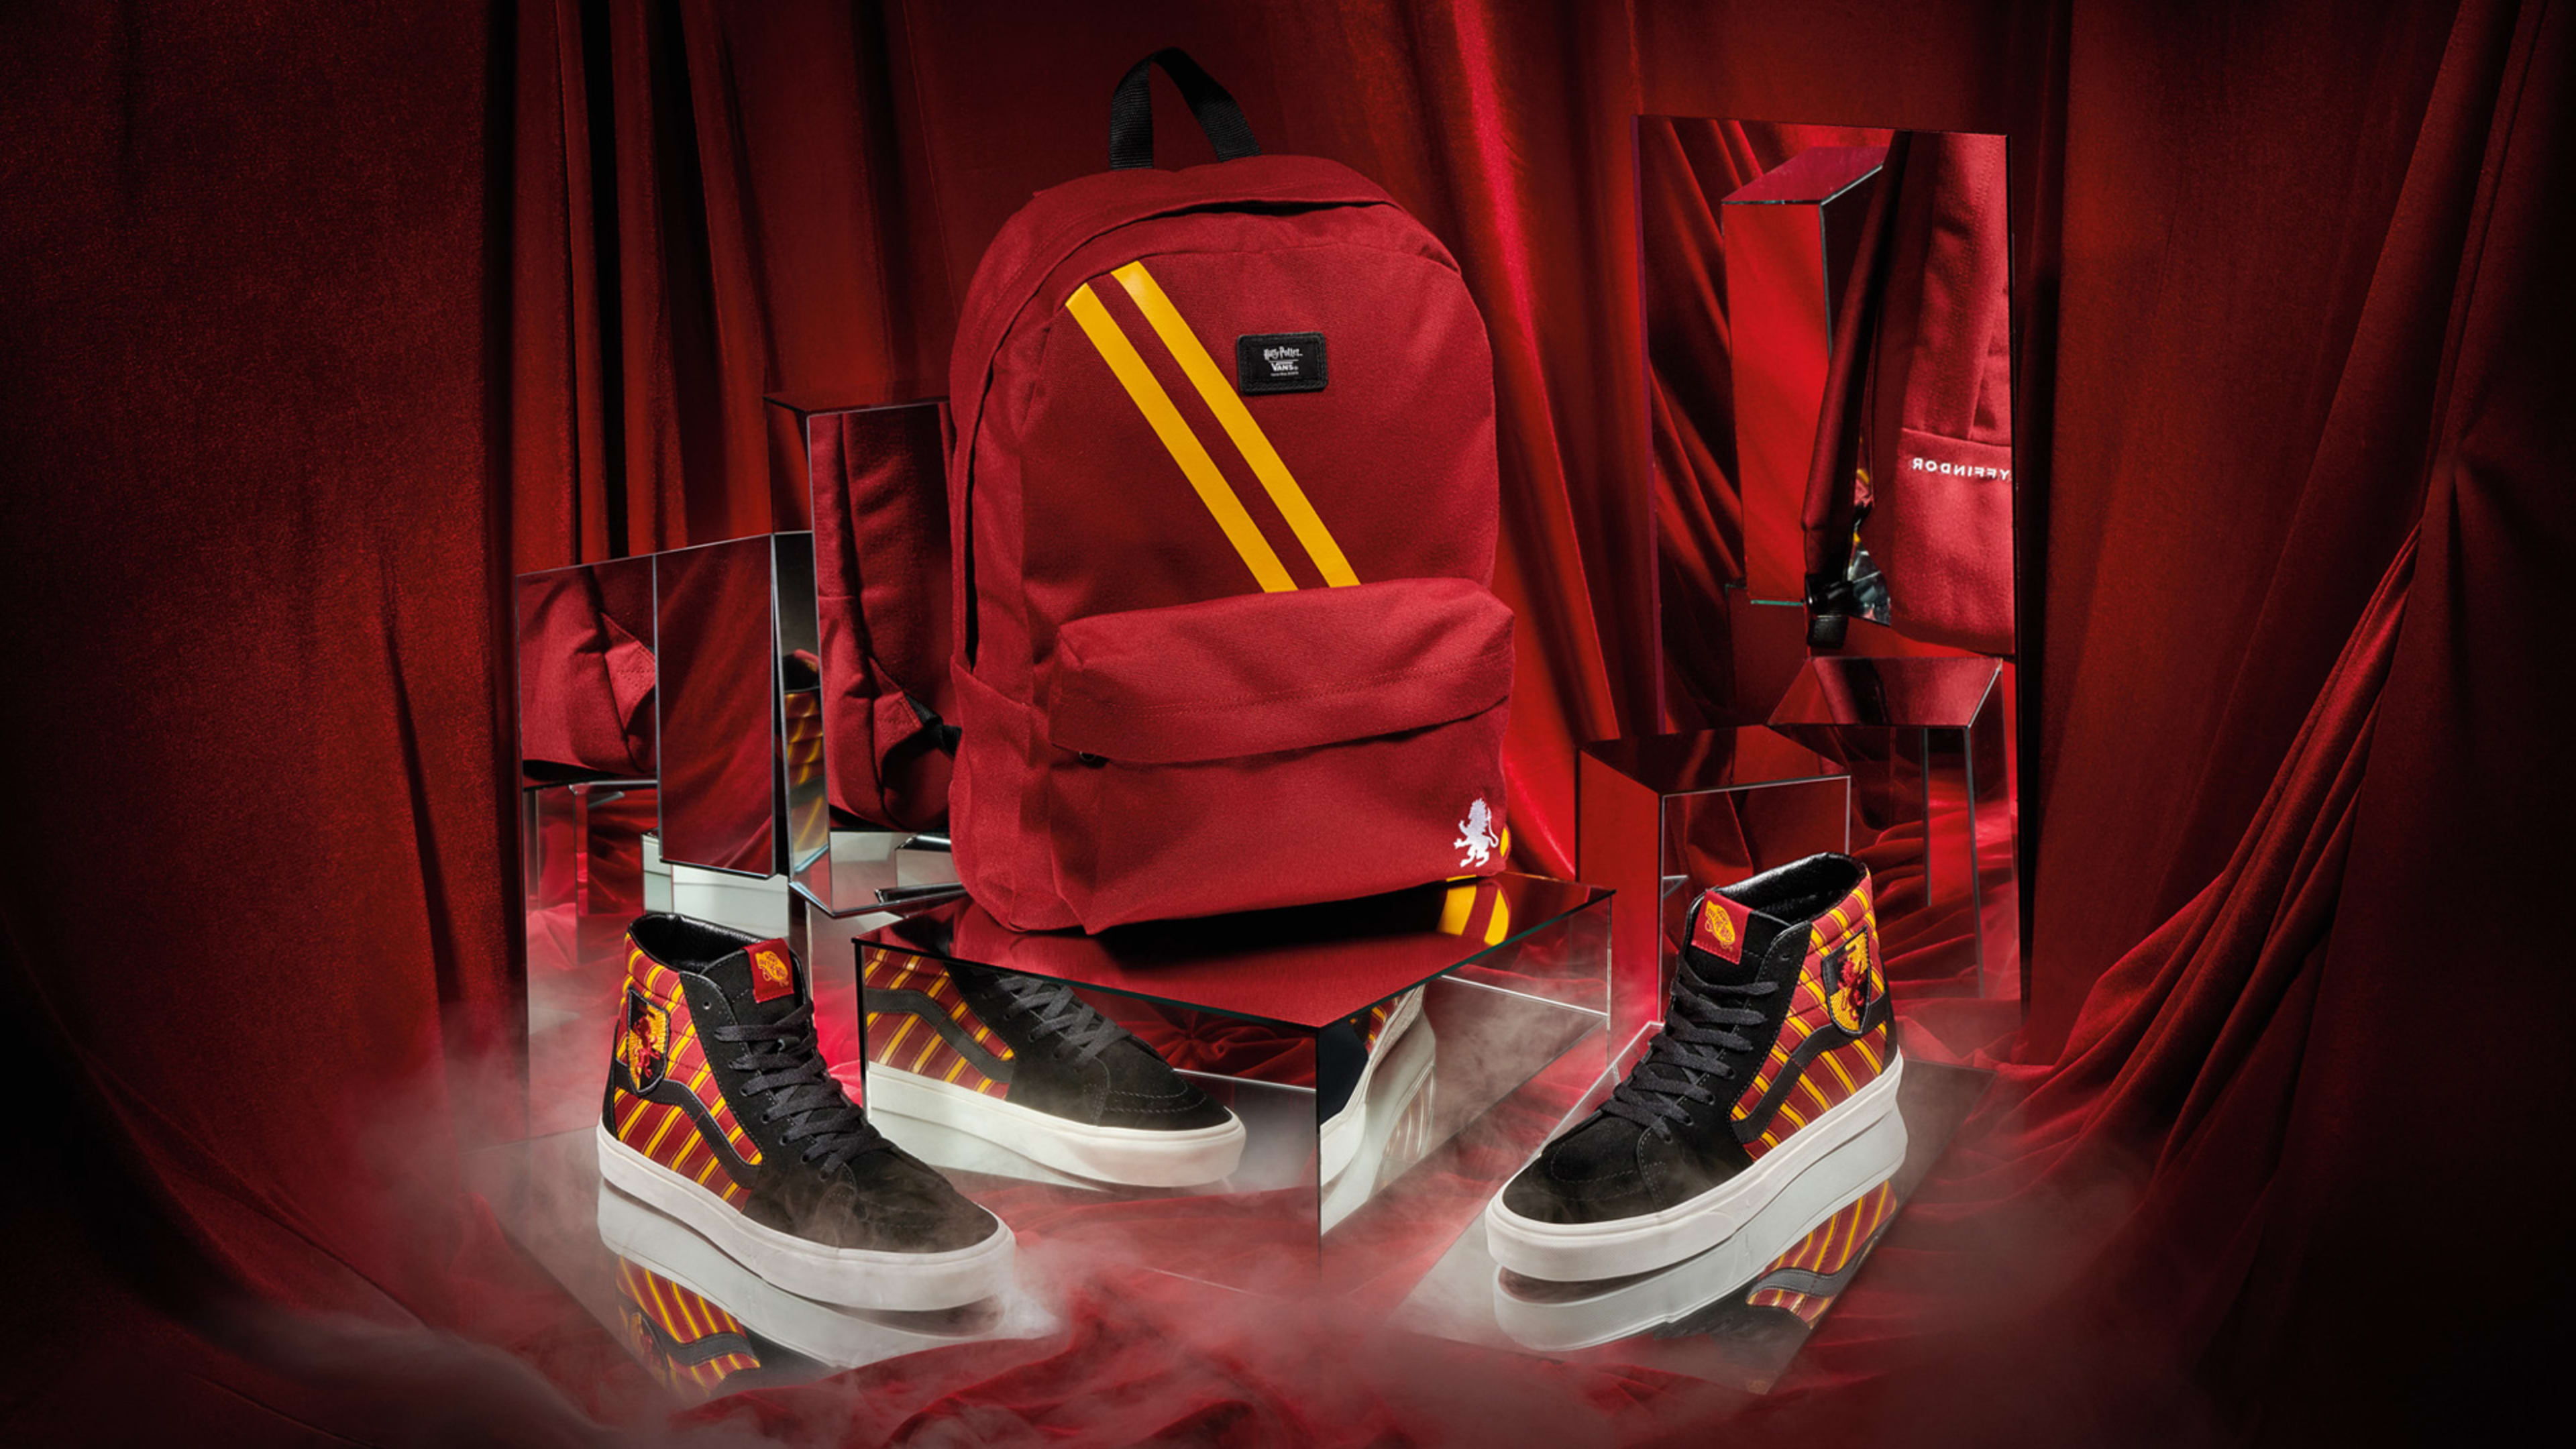 Hey Harry Potter fans, the magical Vans sneakers you’ve been waiting for are here